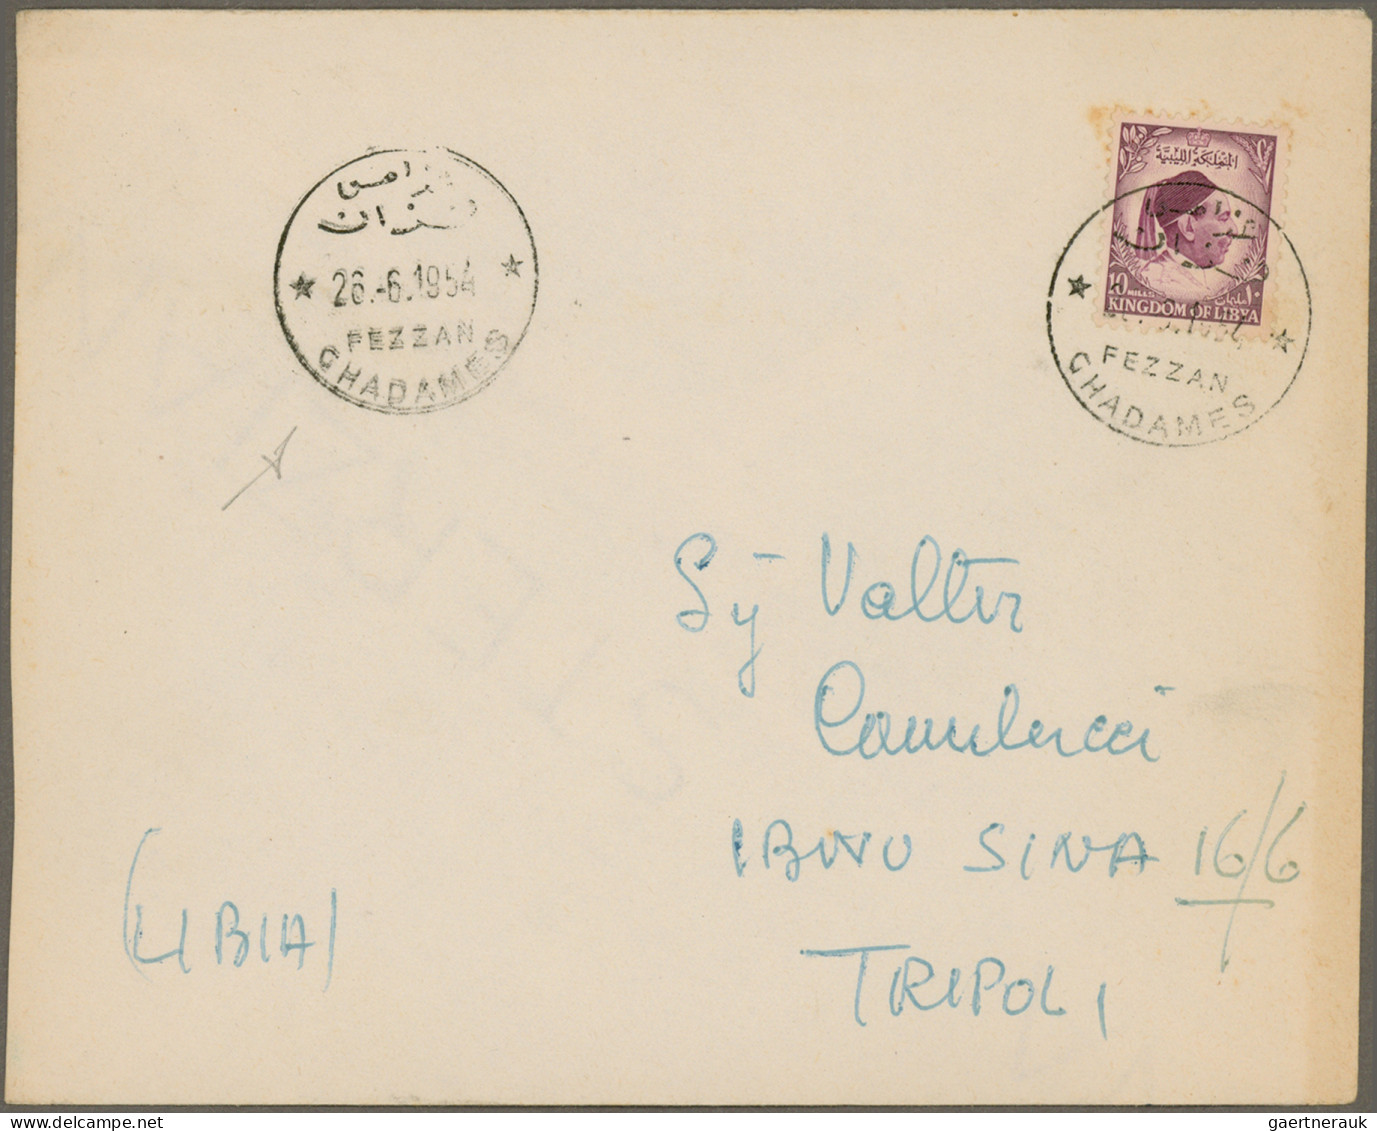 Libya: 1952/1954, four covers franked with values from the 1952 definitives with